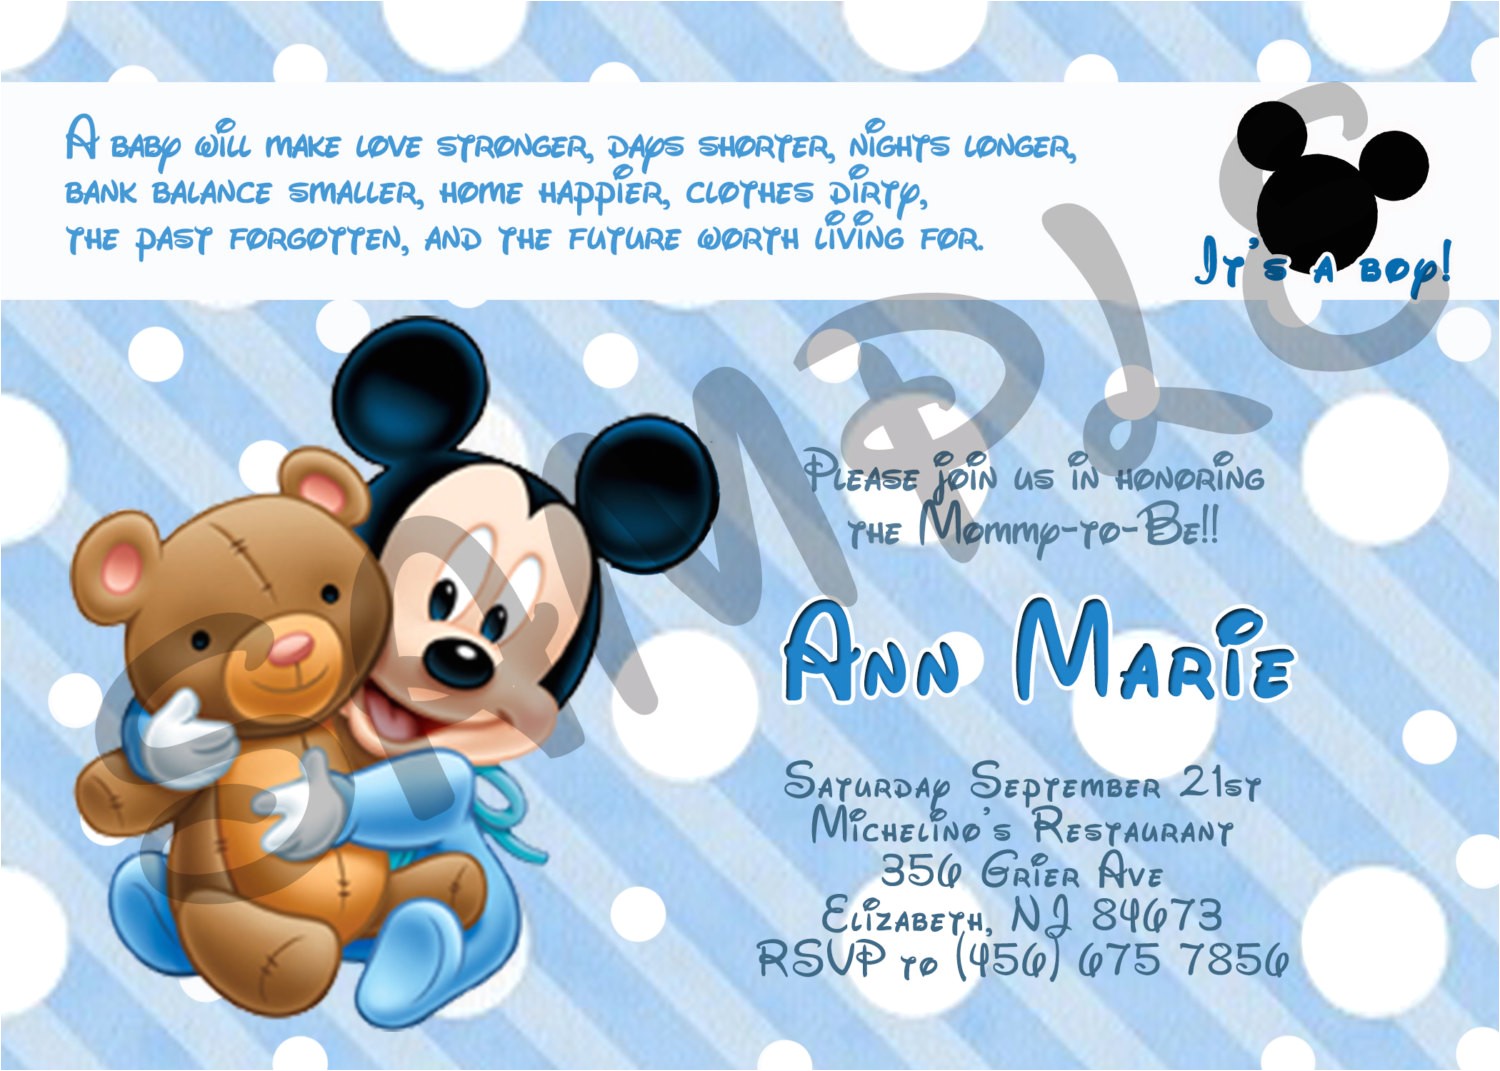 Mickey Mouse Baby Shower Invitations Mickey Mouse Baby Shower Invitation by Eqpartyinvitations